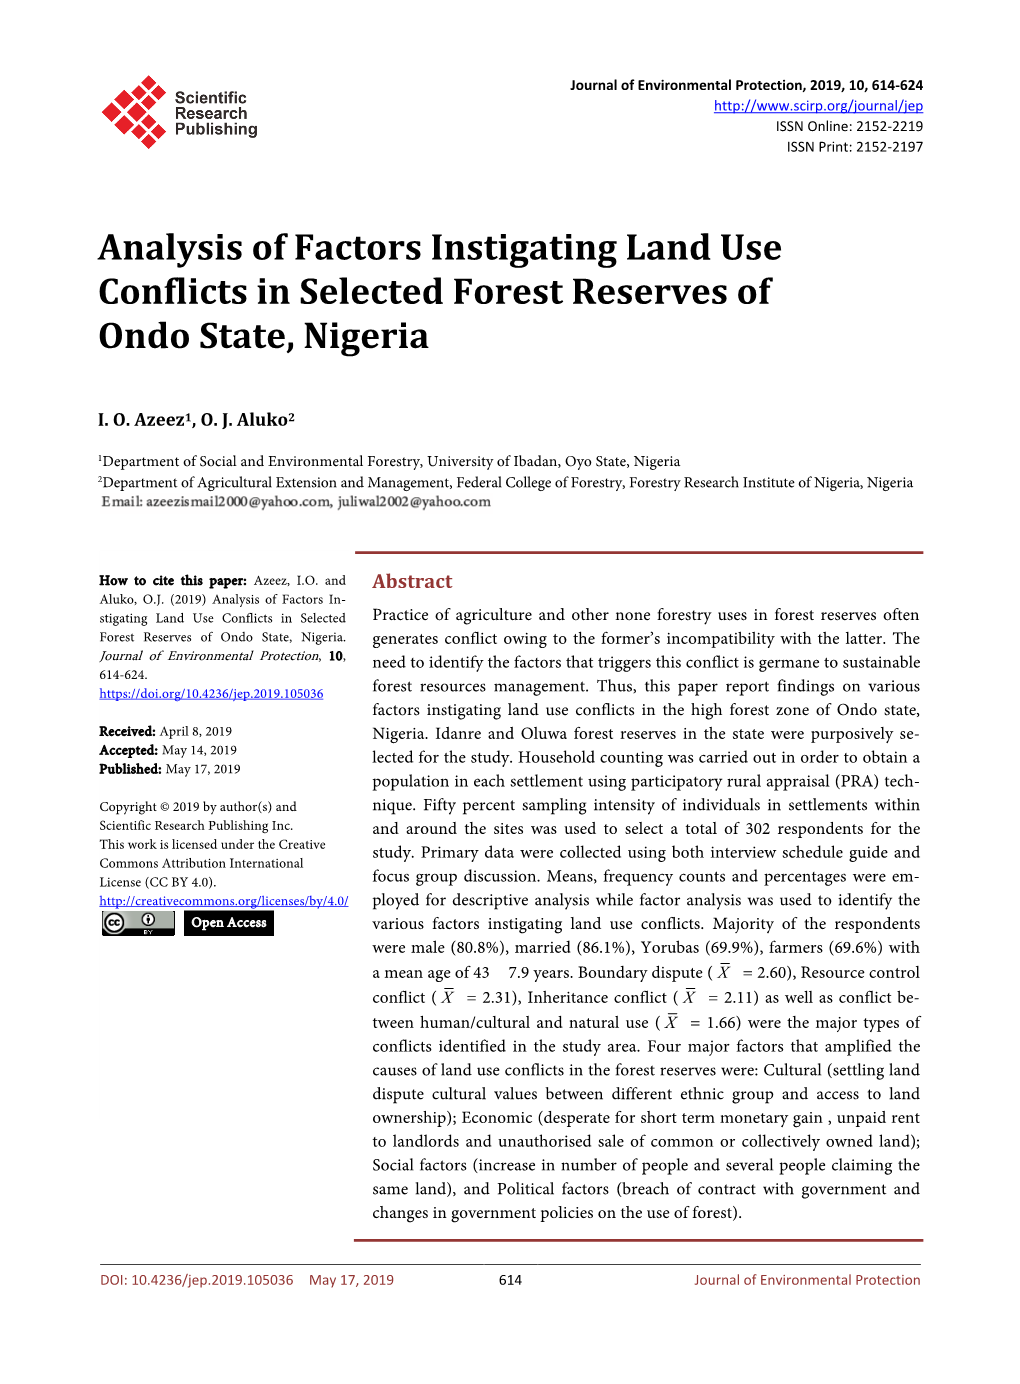 Analysis of Factors Instigating Land Use Conflicts in Selected Forest Reserves of Ondo State, Nigeria